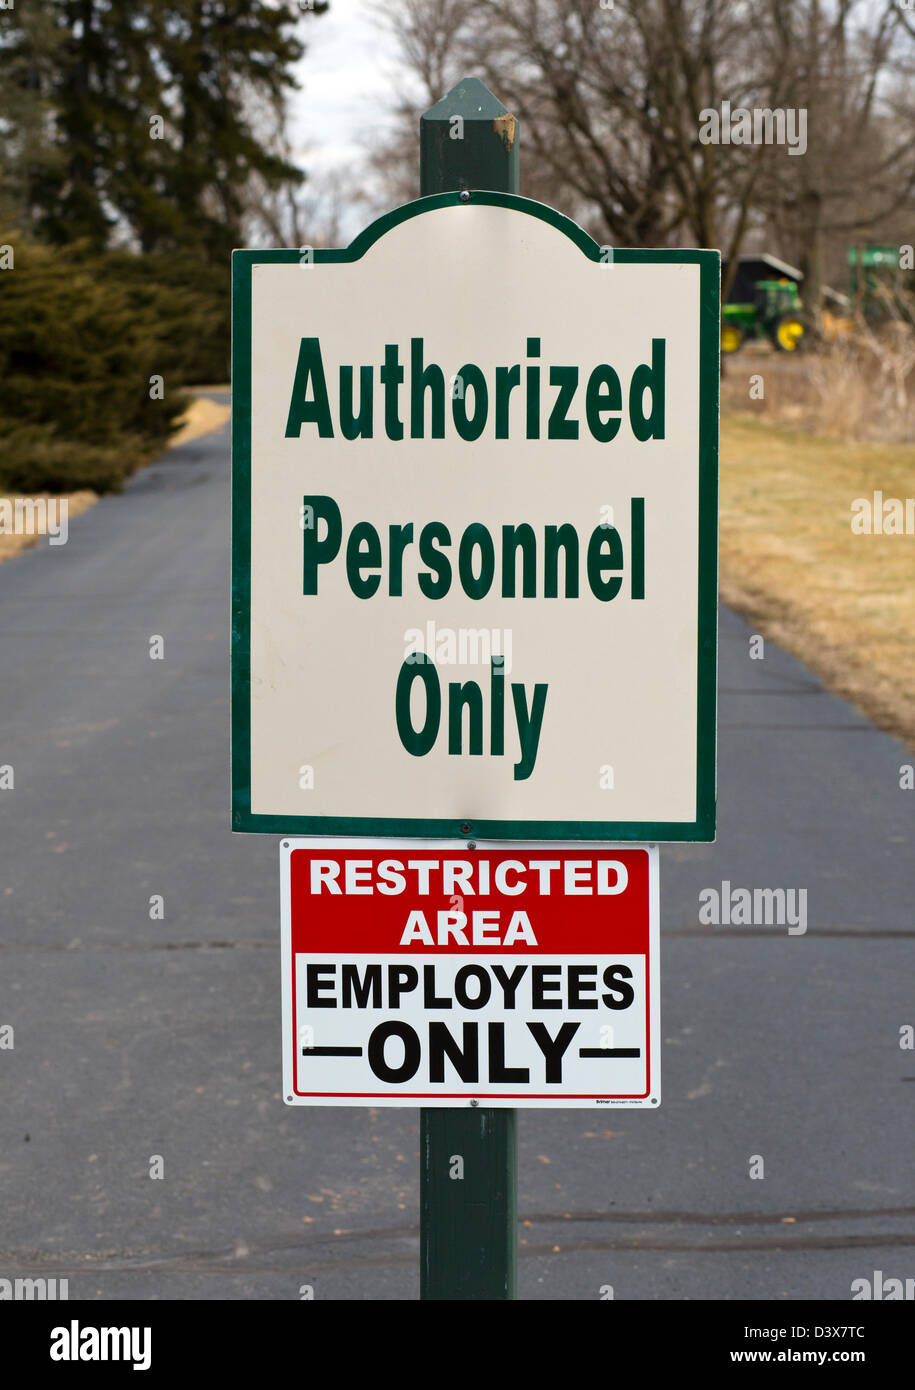 Restricted area sign authorized personnel only. Stock Photo